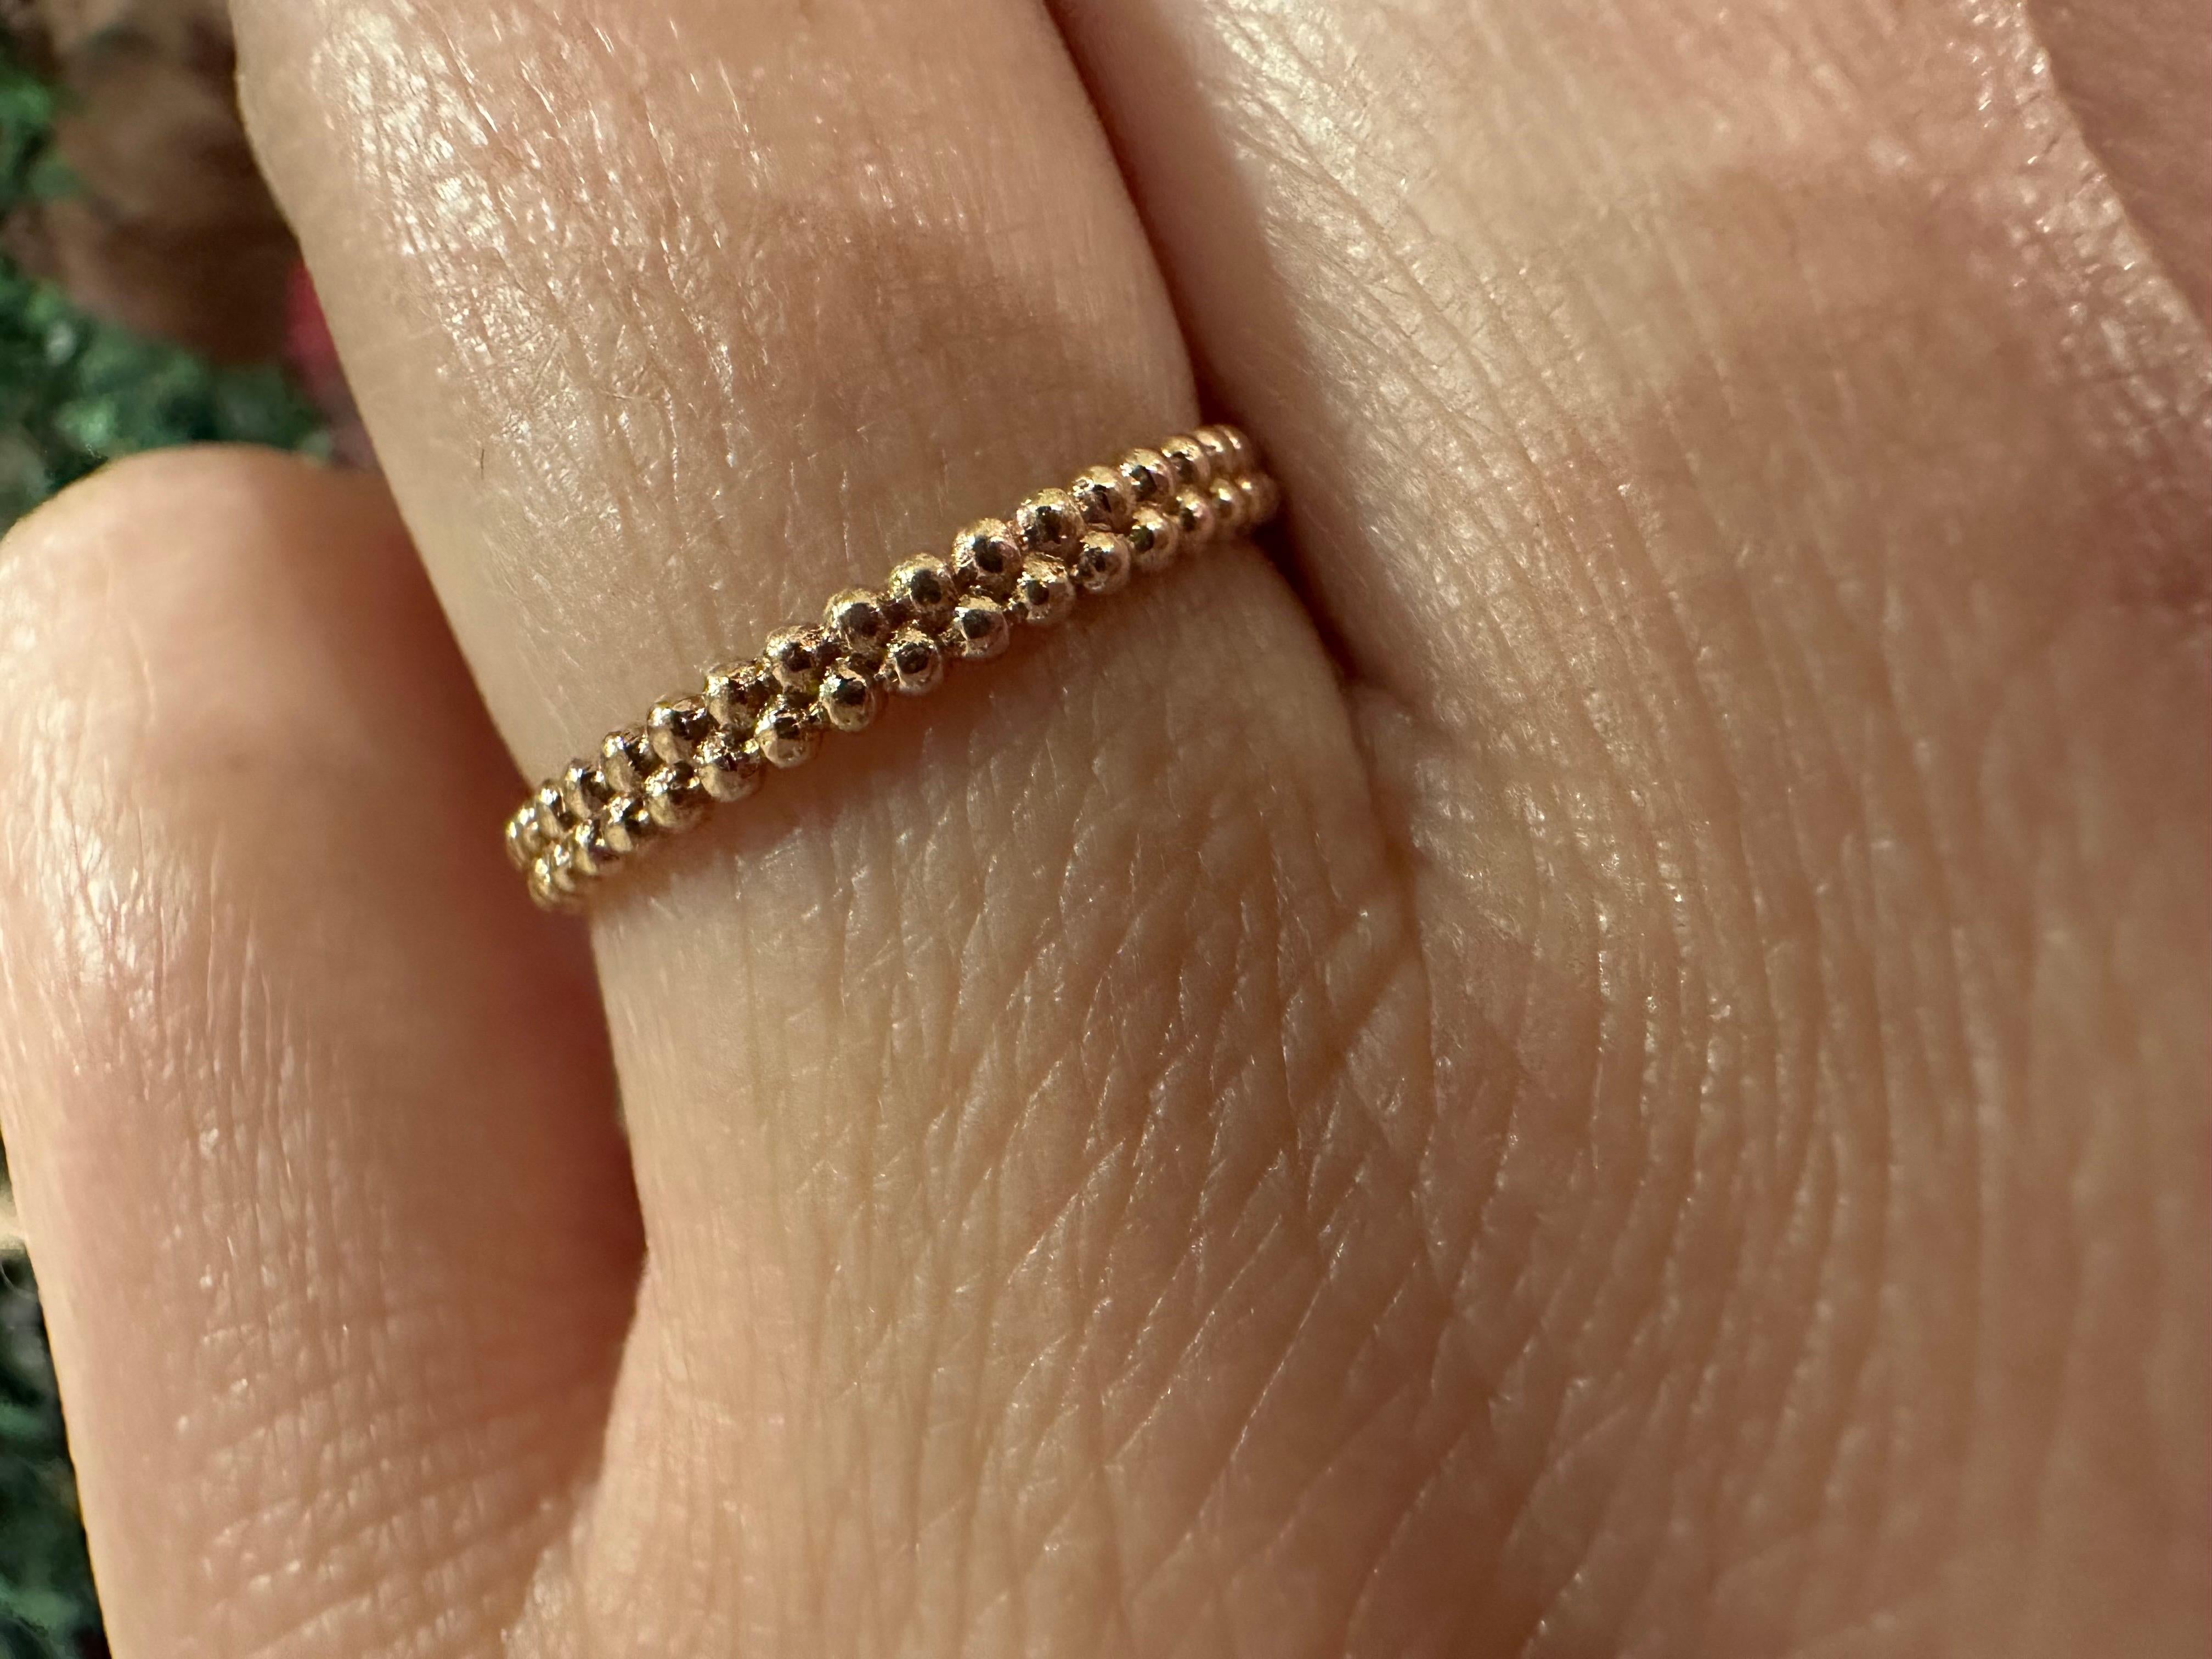 Bubble design plan gold ring size 6.5, it has a sizing bar at the back so it can be re-sized.

Metal Type: 14KT rose gold

Certificate of authenticity comes with purchase

ABOUT US
We are a family-owned business. Our studio in located in the heart